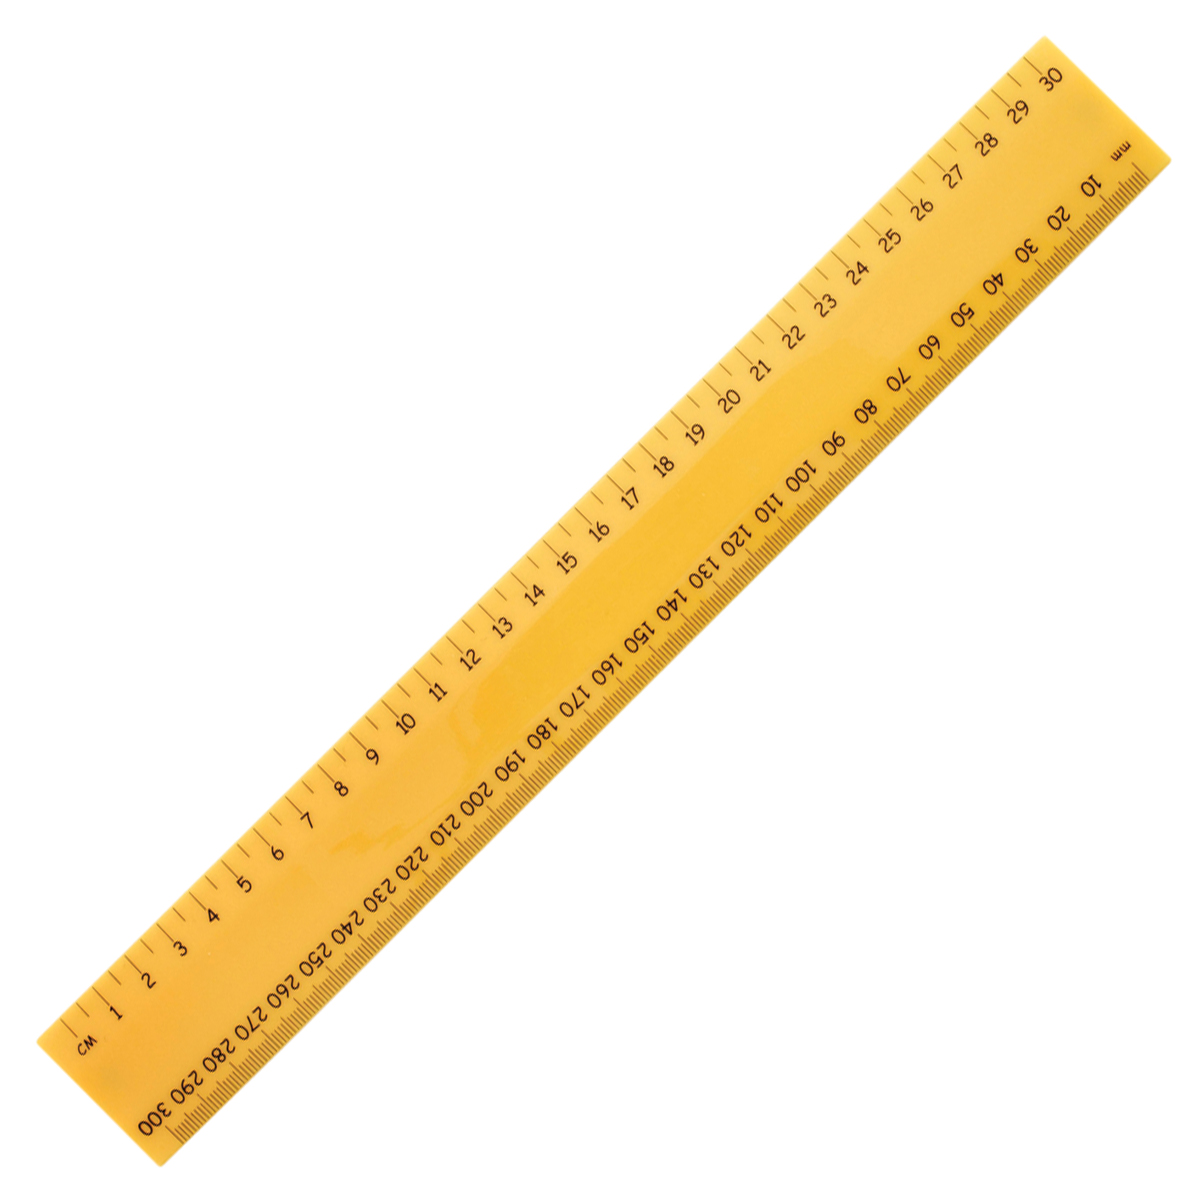 Yellow School Ruler - Free Clipart Images